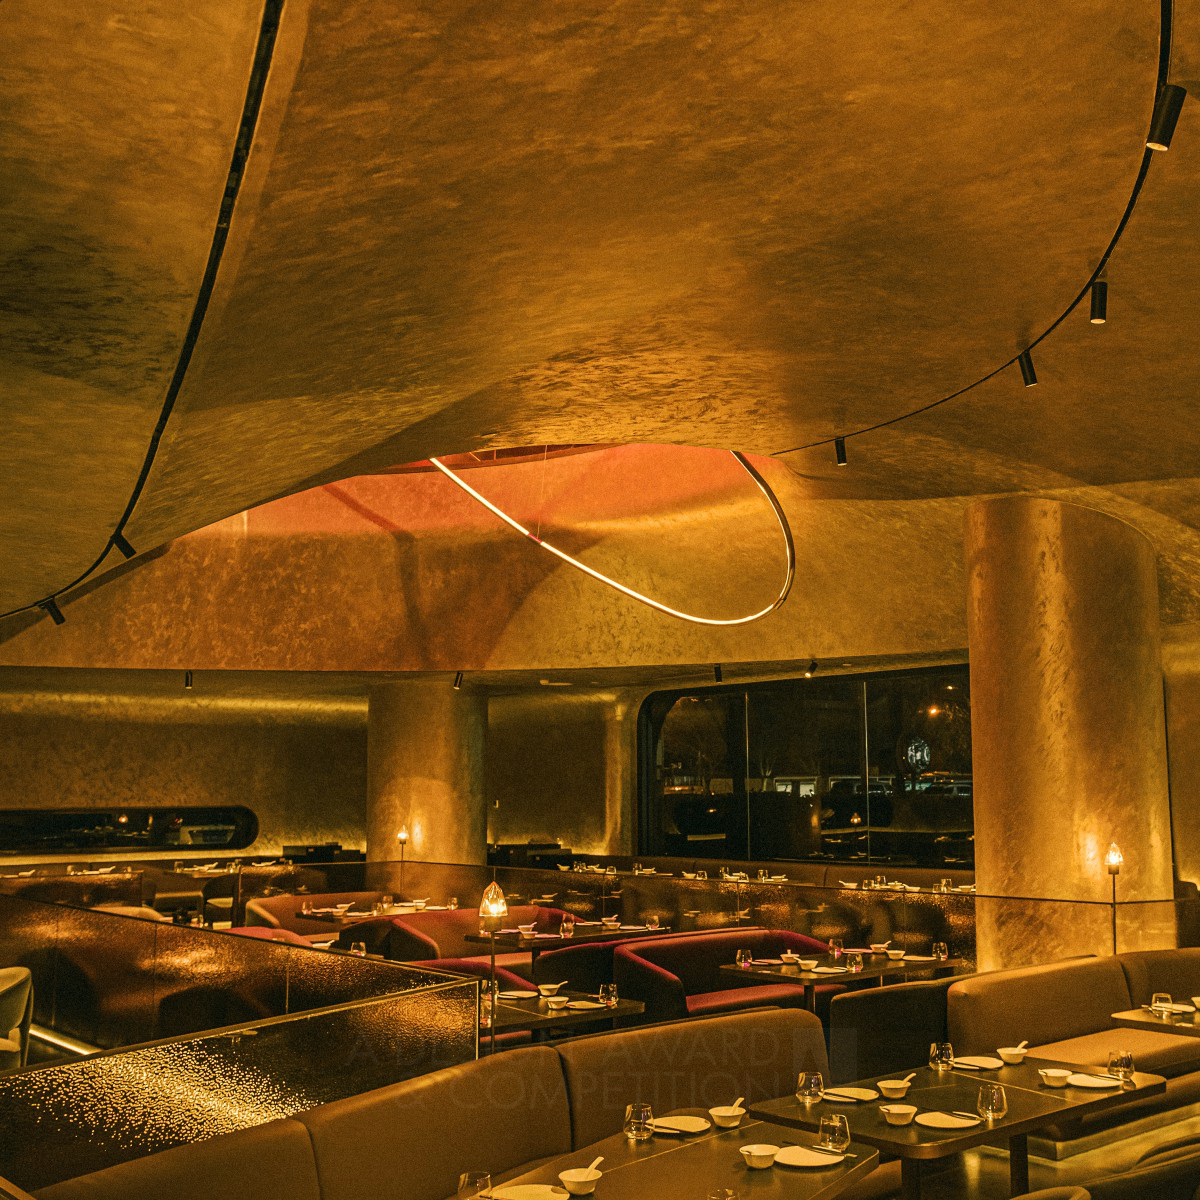 Dome Restaurant and Bar by Hongbo Wung